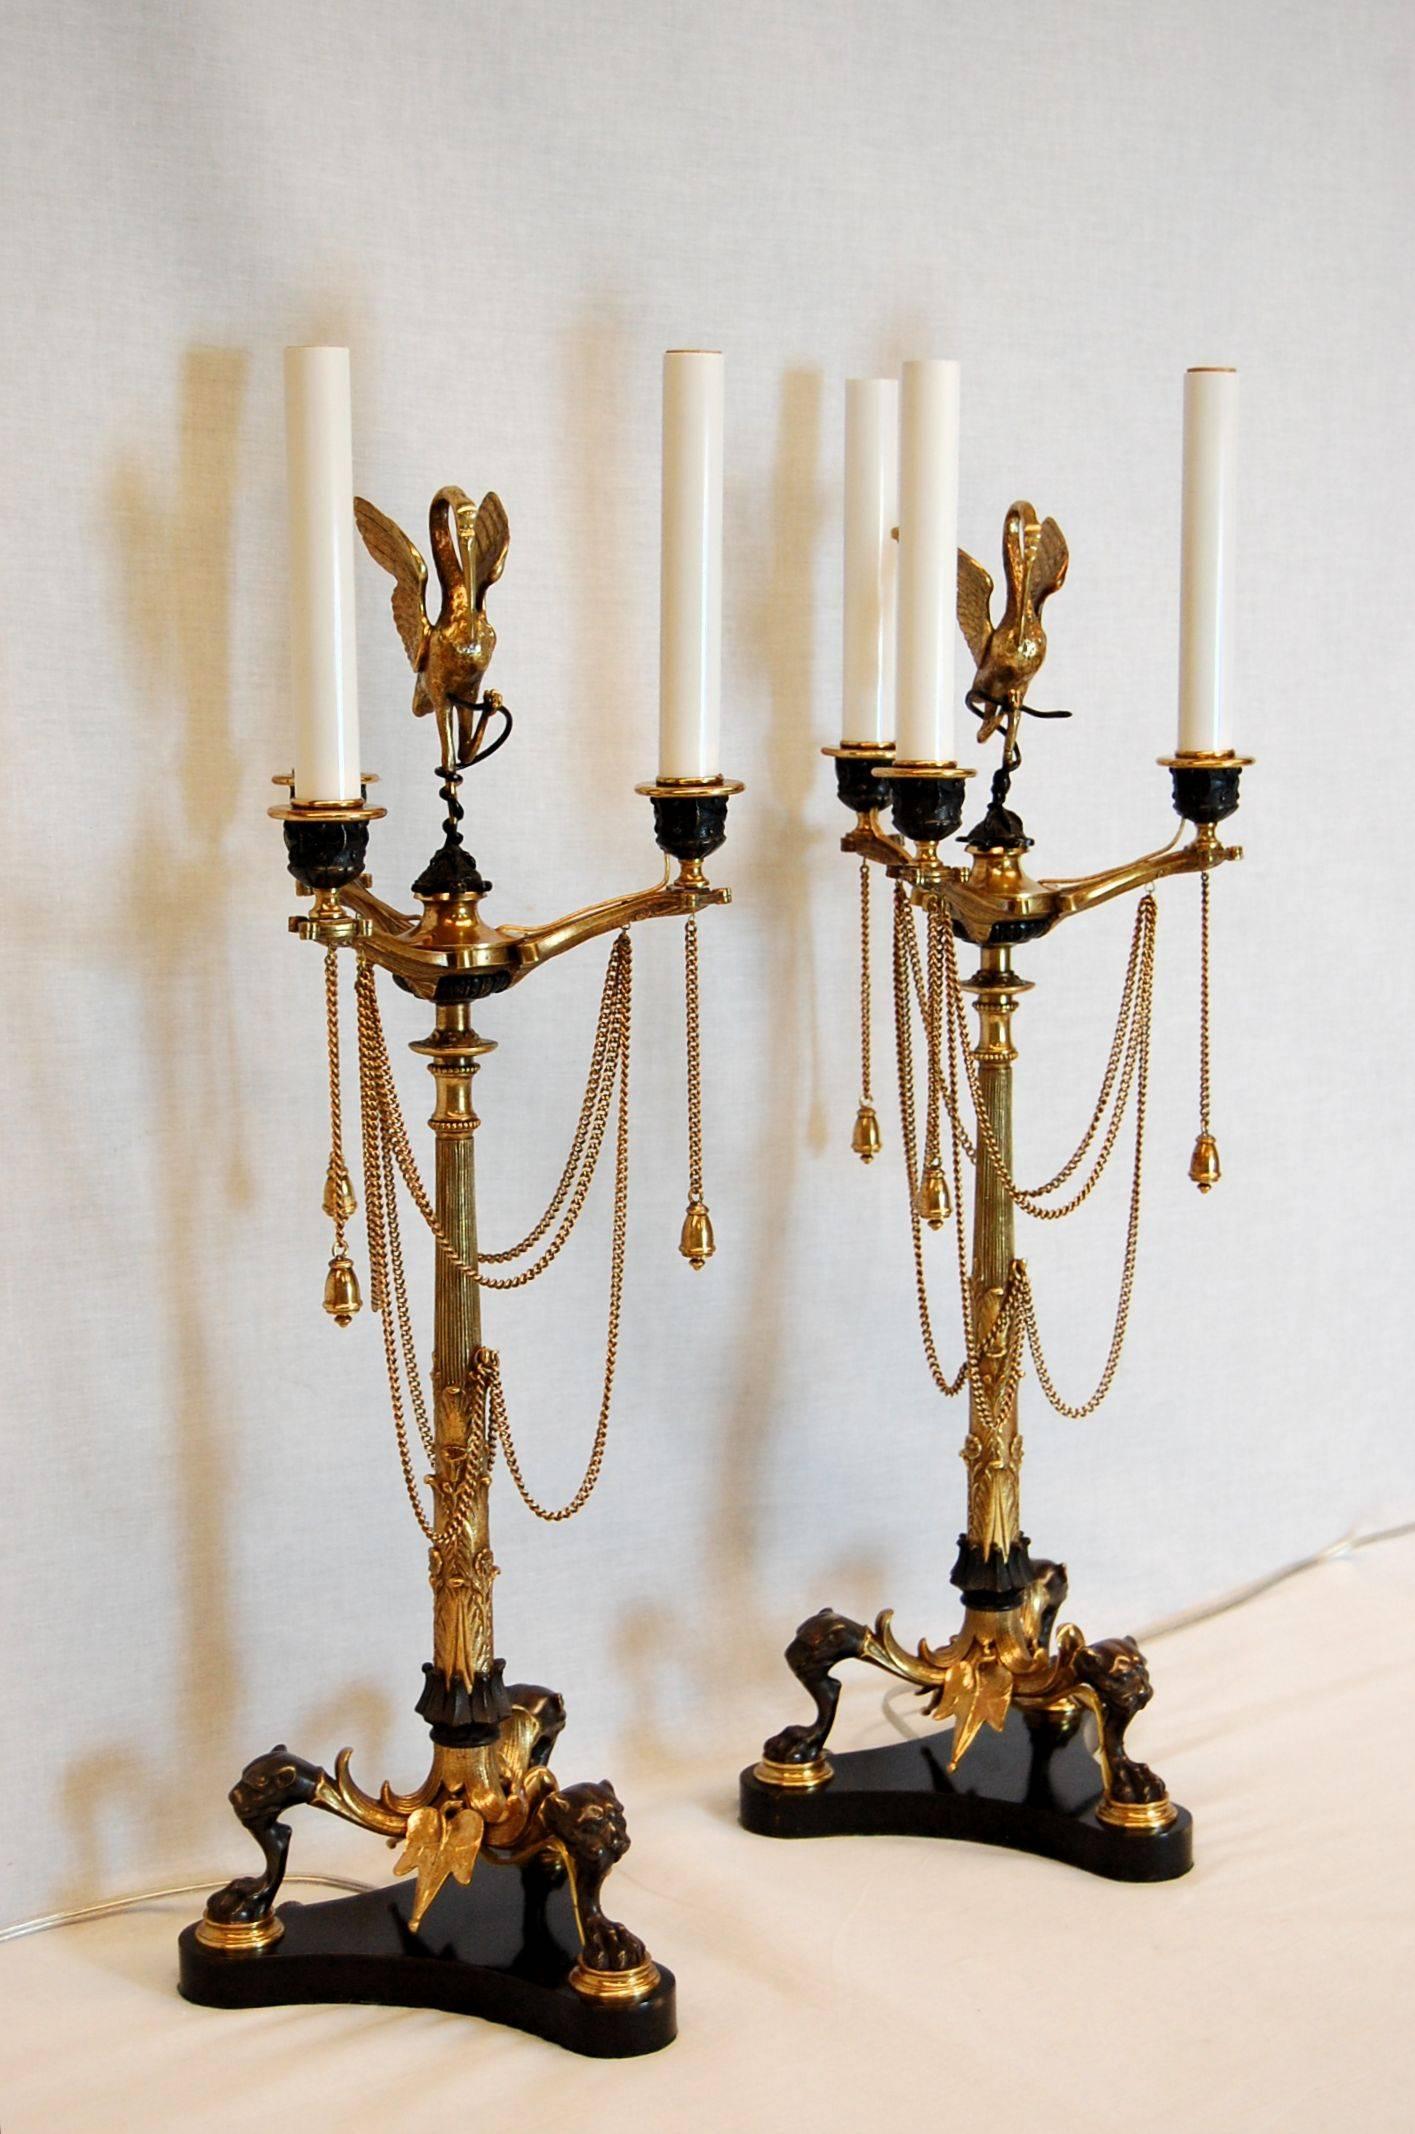 Pair of Renaissance Revival gilt bronze three-light candelabra with a beautiful bird sitting atop a thin bamboo-like leafy column stem with chains hung, in oil lamp form. Tripod legs with lion’s heads and paw feet on concave-sided metal base. Just